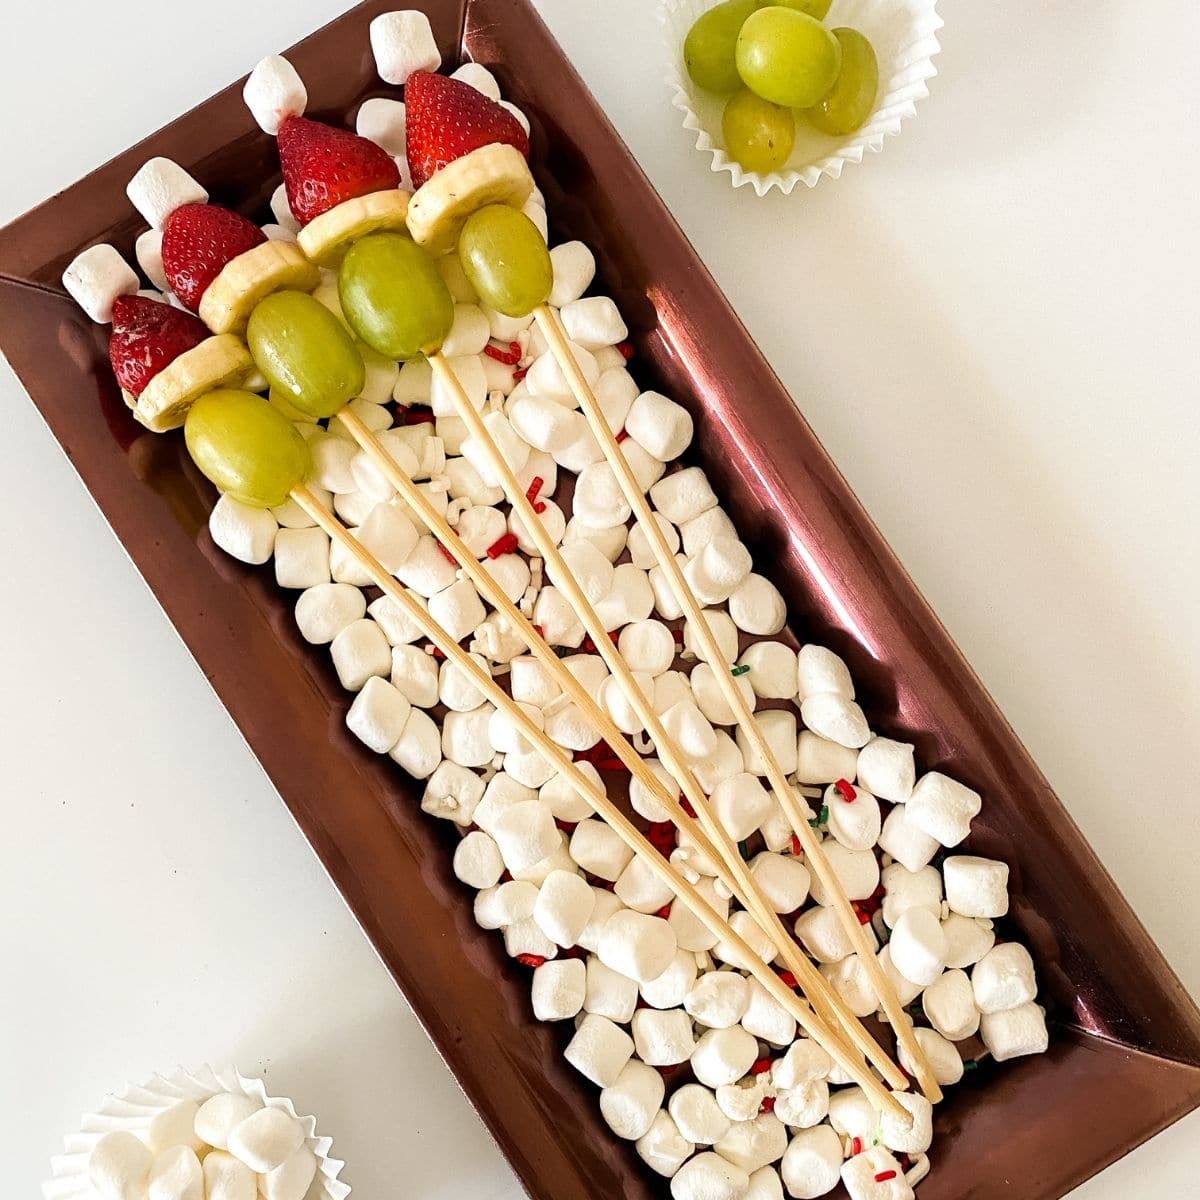 Grinch kabob on platter with marshmallows, grapes, banana, and strawberries.